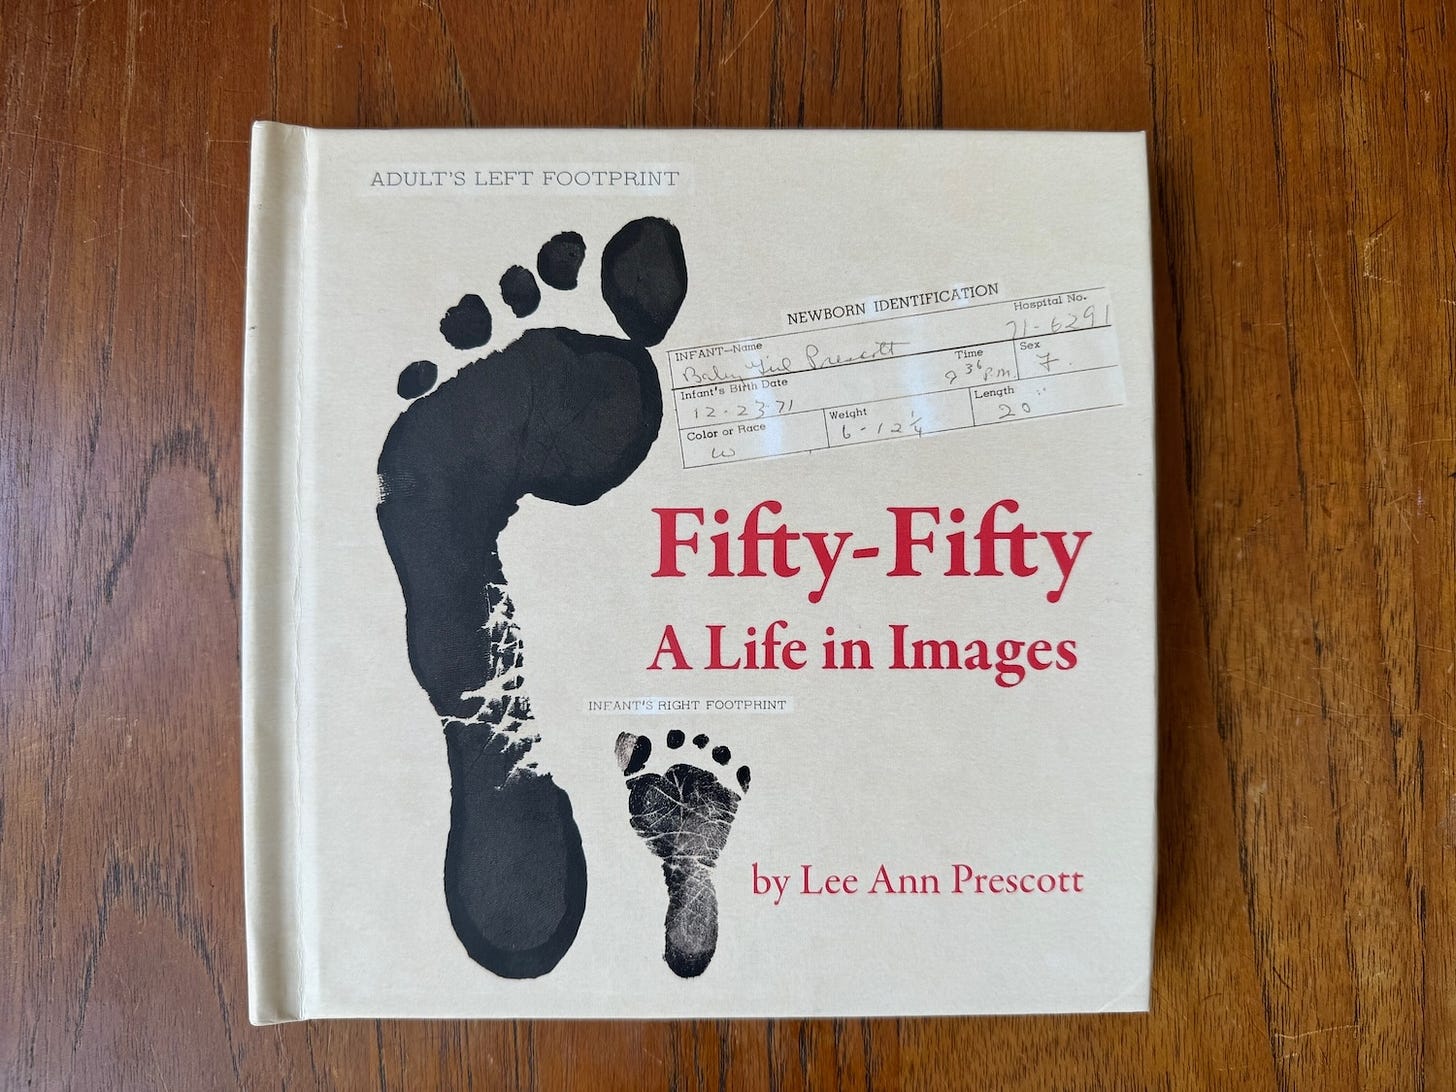 A book with the title Fifty-Fifty: A Life in Images with prints of an adult foot and a baby foot